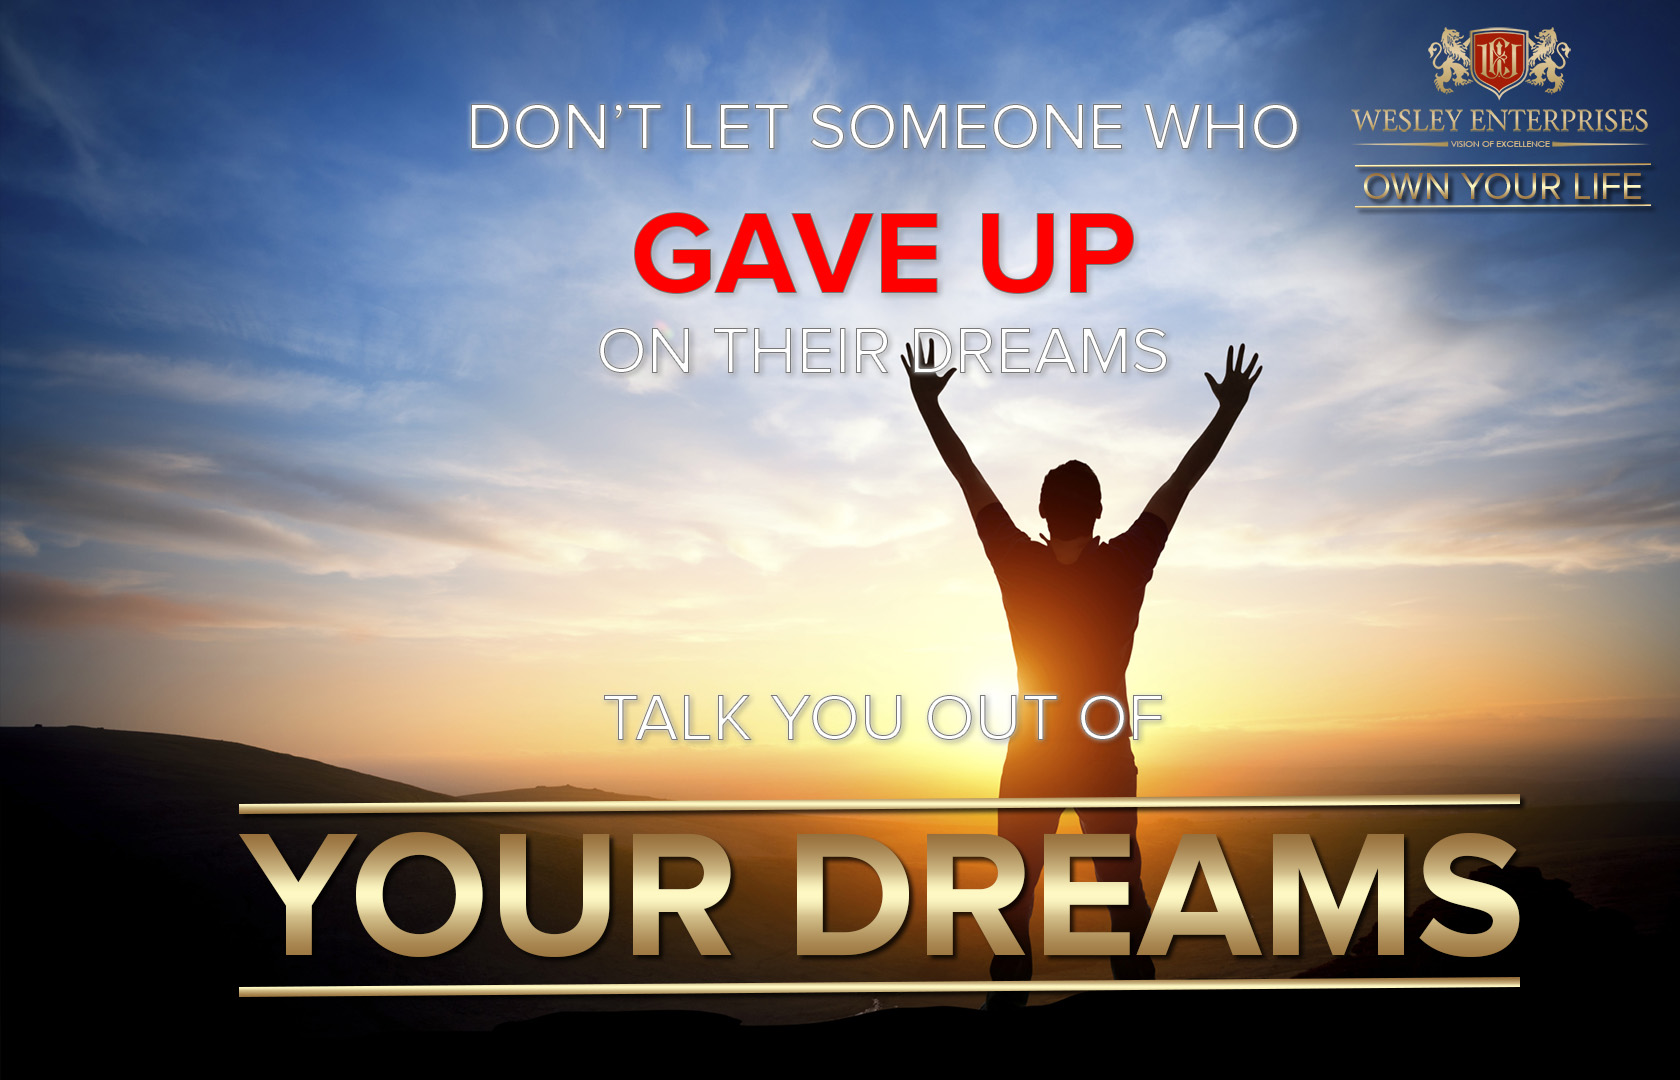 Don't let someone who gave up on their dreams talk you out of yours